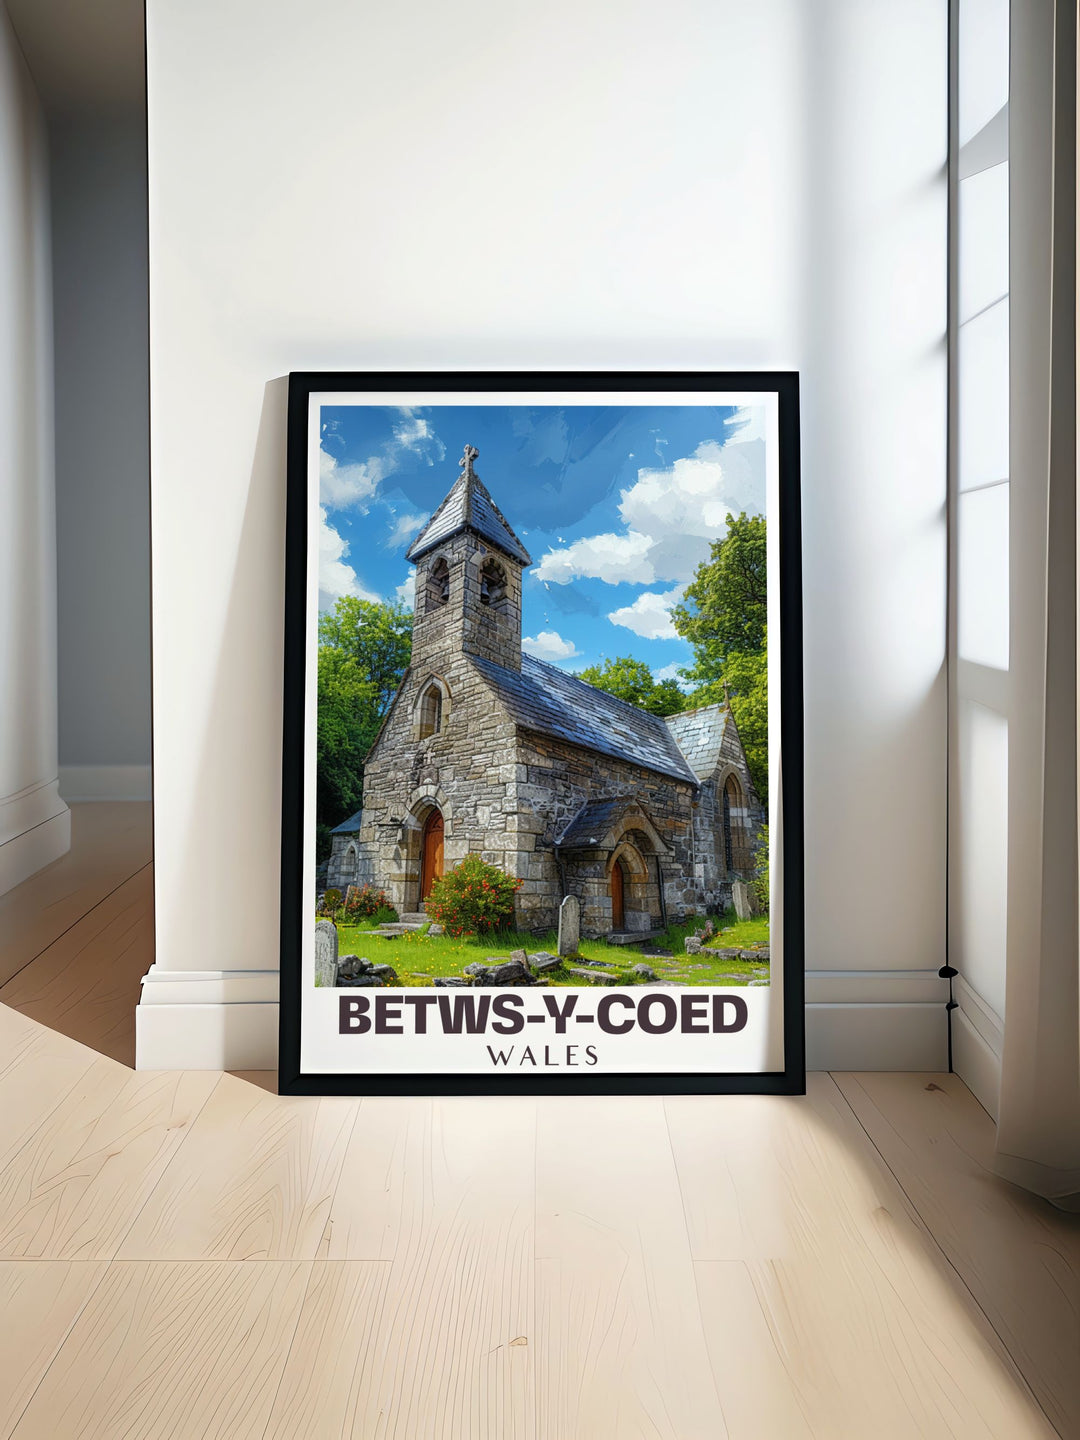 Betws y Coed print featuring the stunning St. Michaels Old Church surrounded by lush Welsh landscapes perfect for adding a touch of nature and history to your home decor or as a thoughtful gift for lovers of Wales charming villages and historic landmarks.